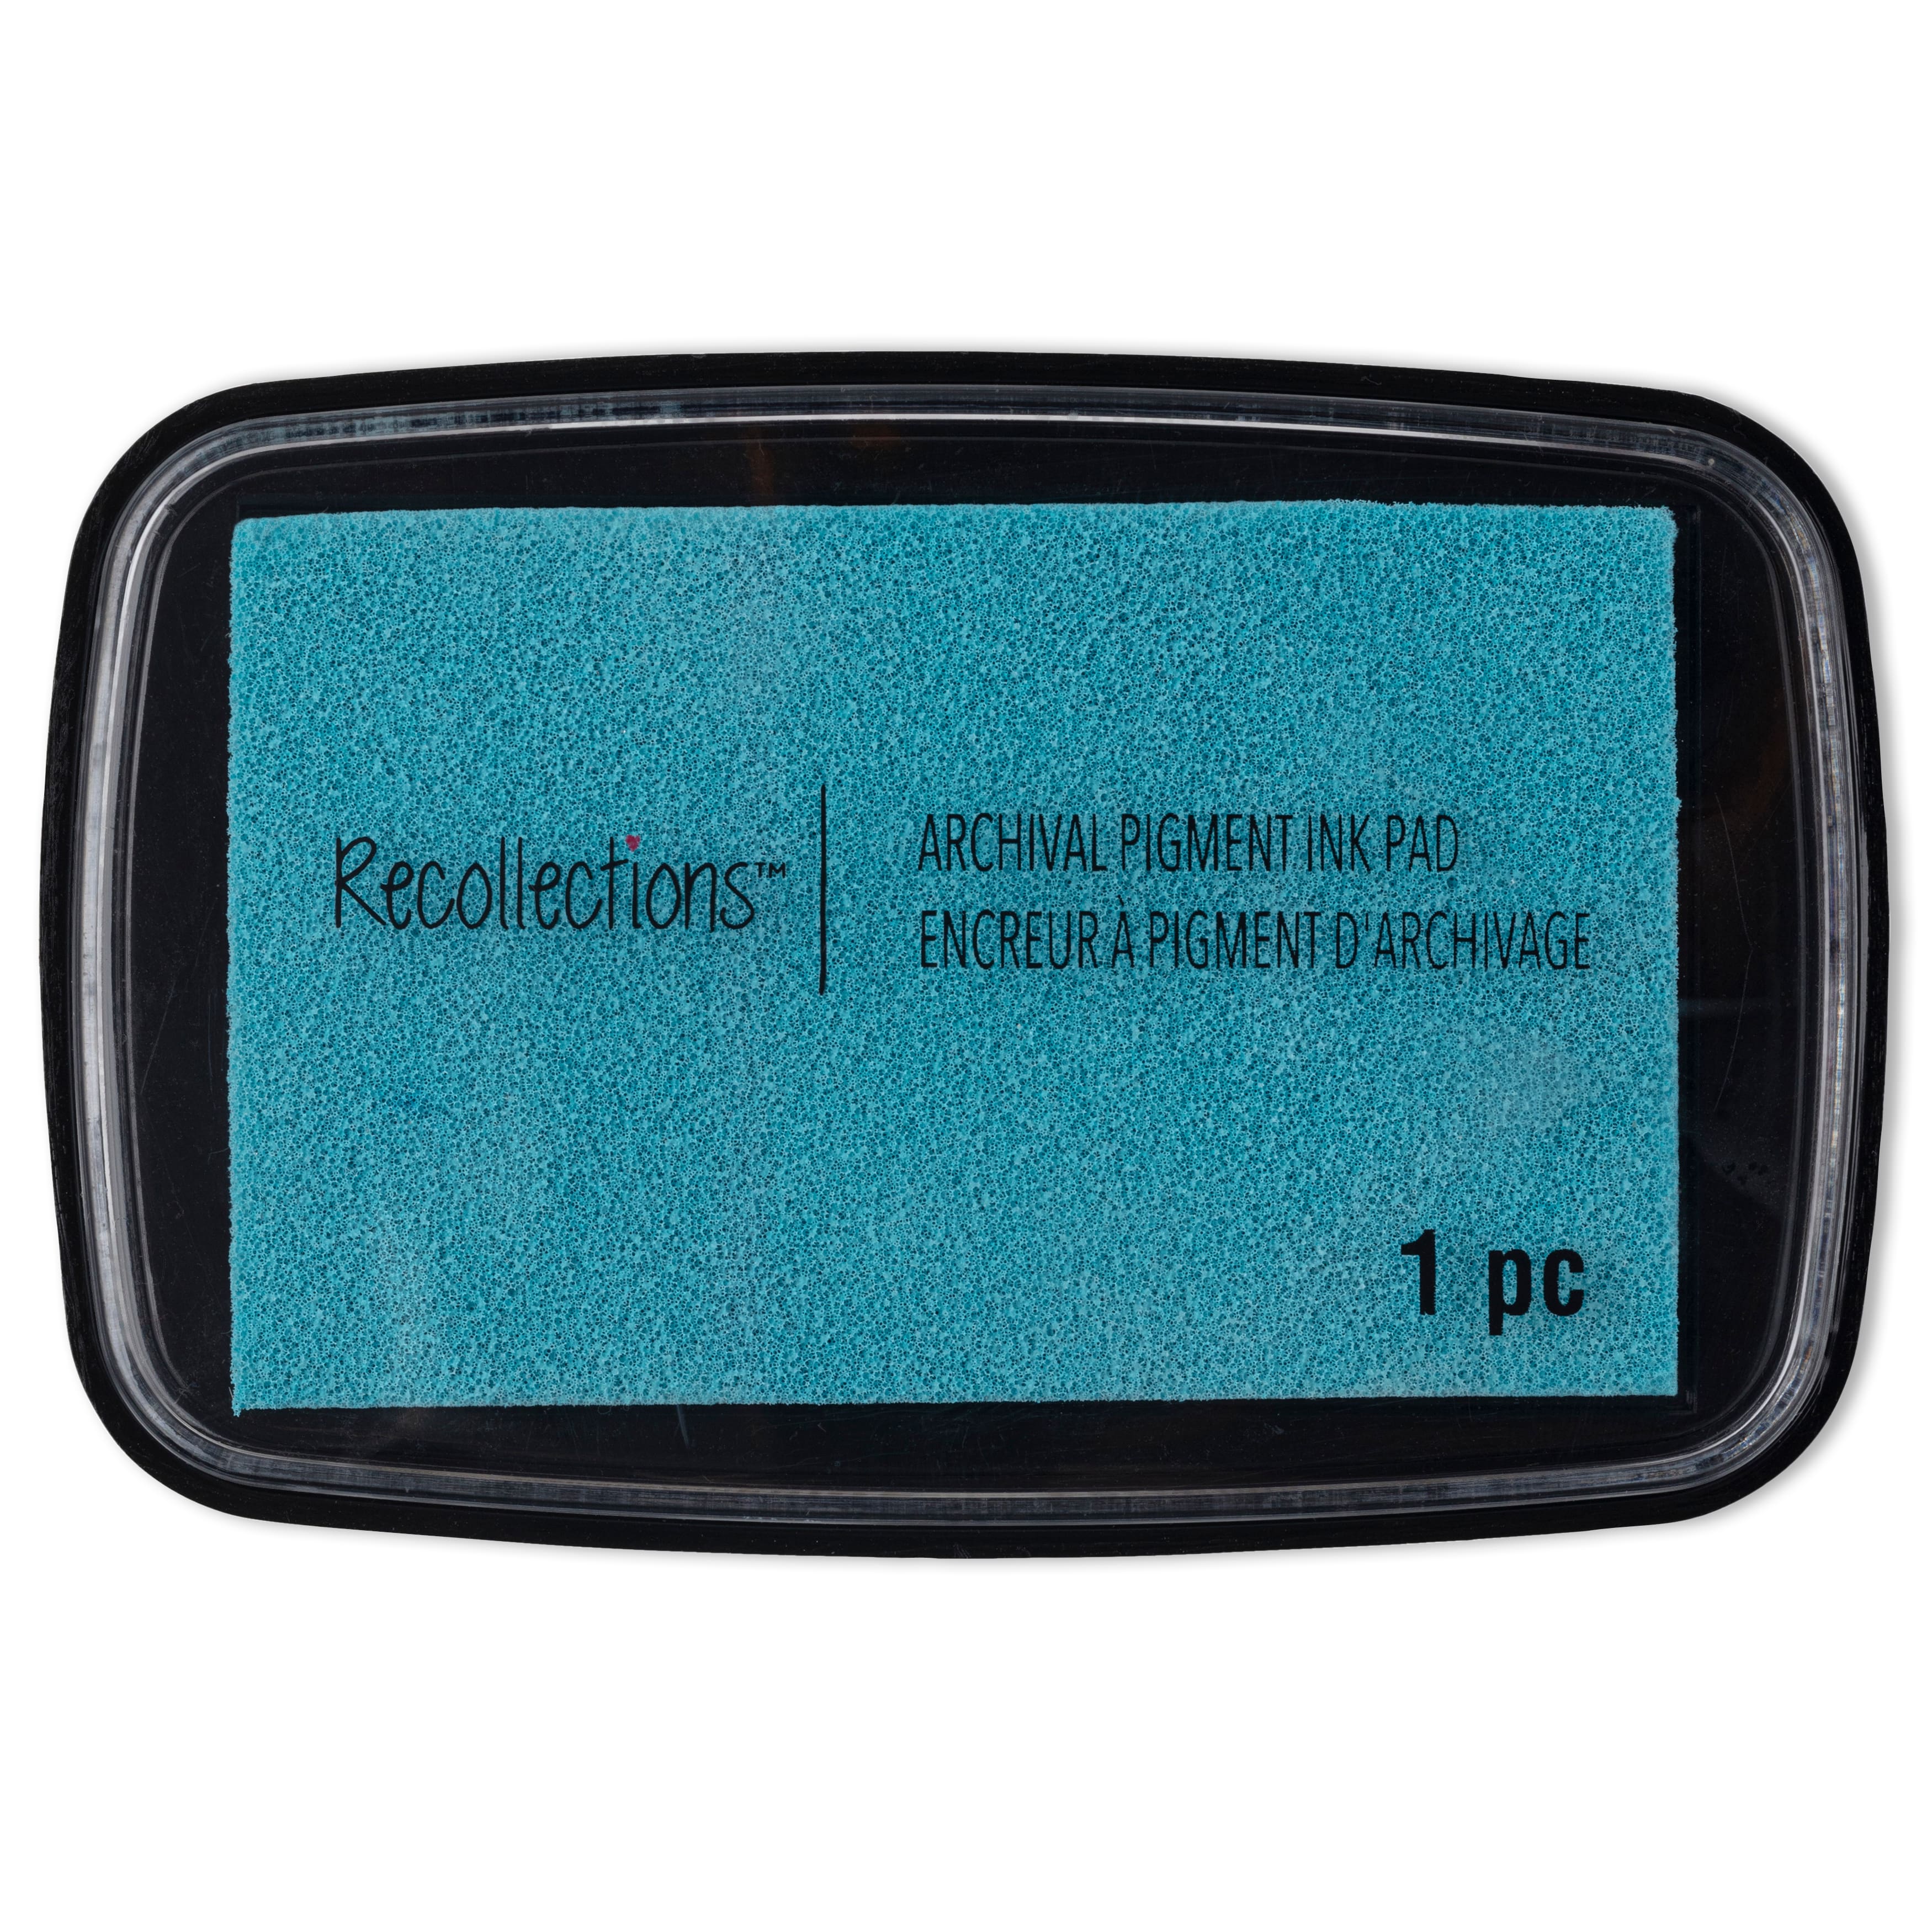 Archival Pigment Ink Pad by Recollections&#x2122;